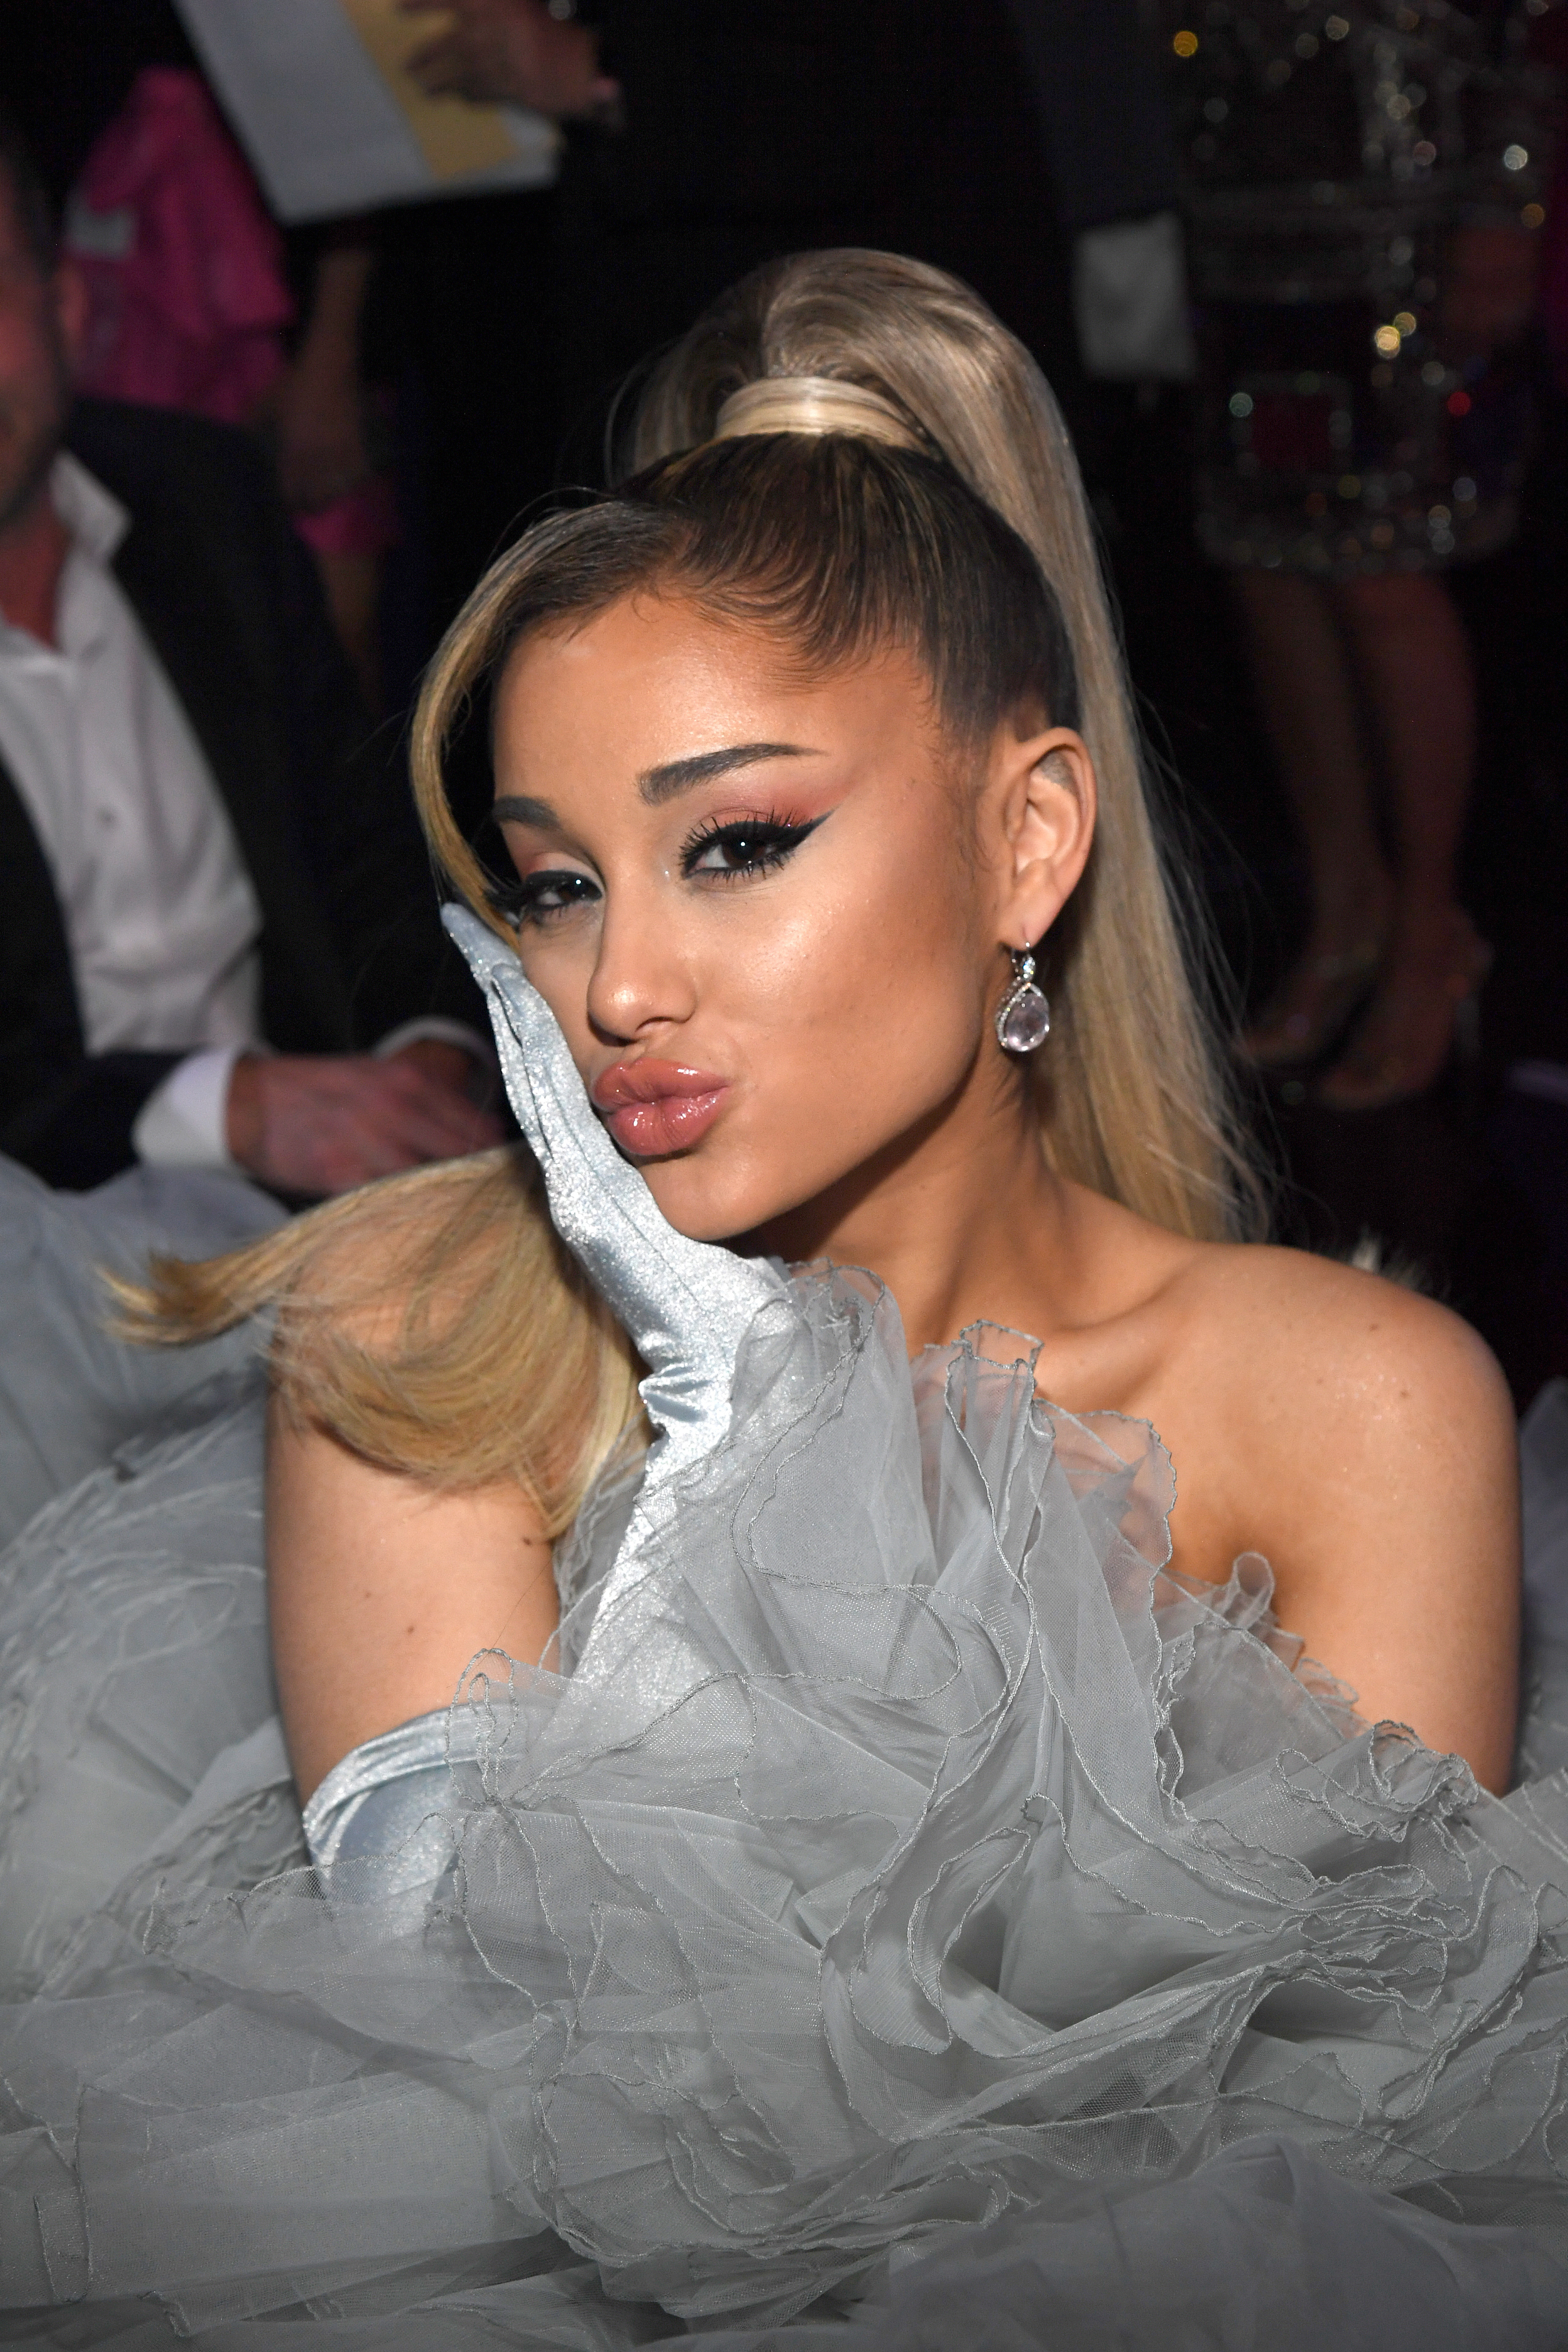 Close-up of Ariana with pursed lips